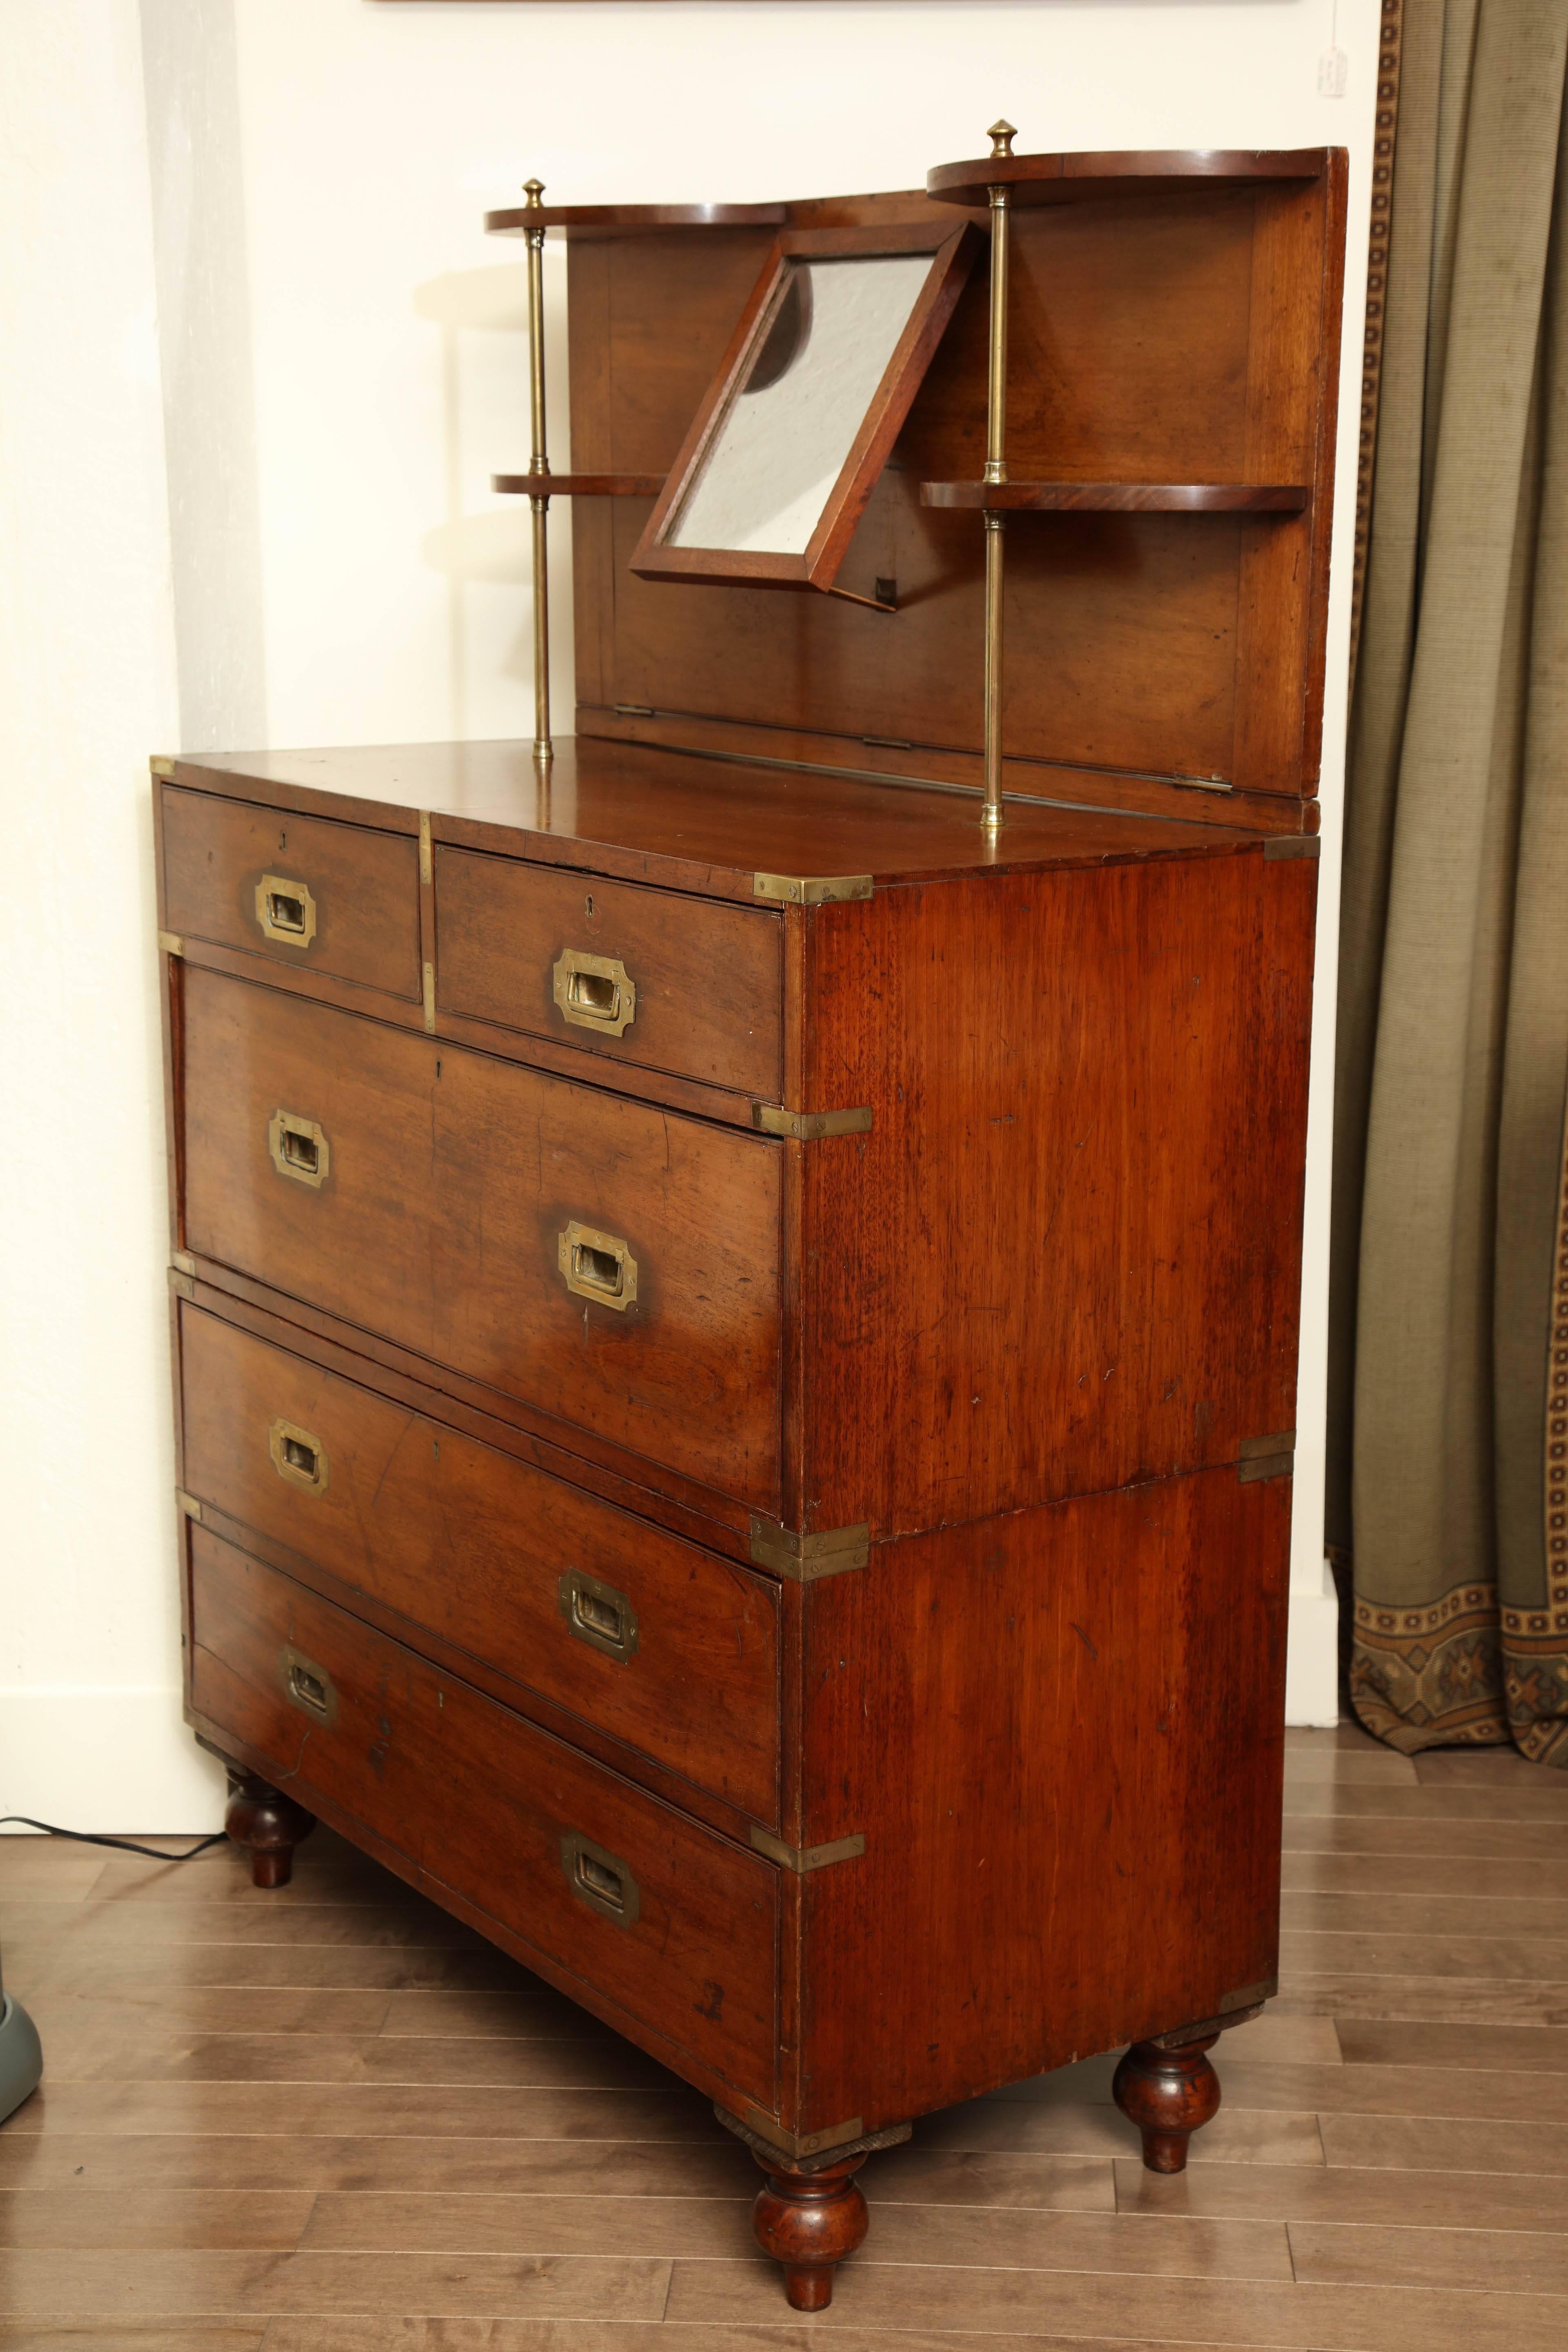 Unusual, 19th century English, mahogany campaign chest with folding super structure. Chest is in two pieces.